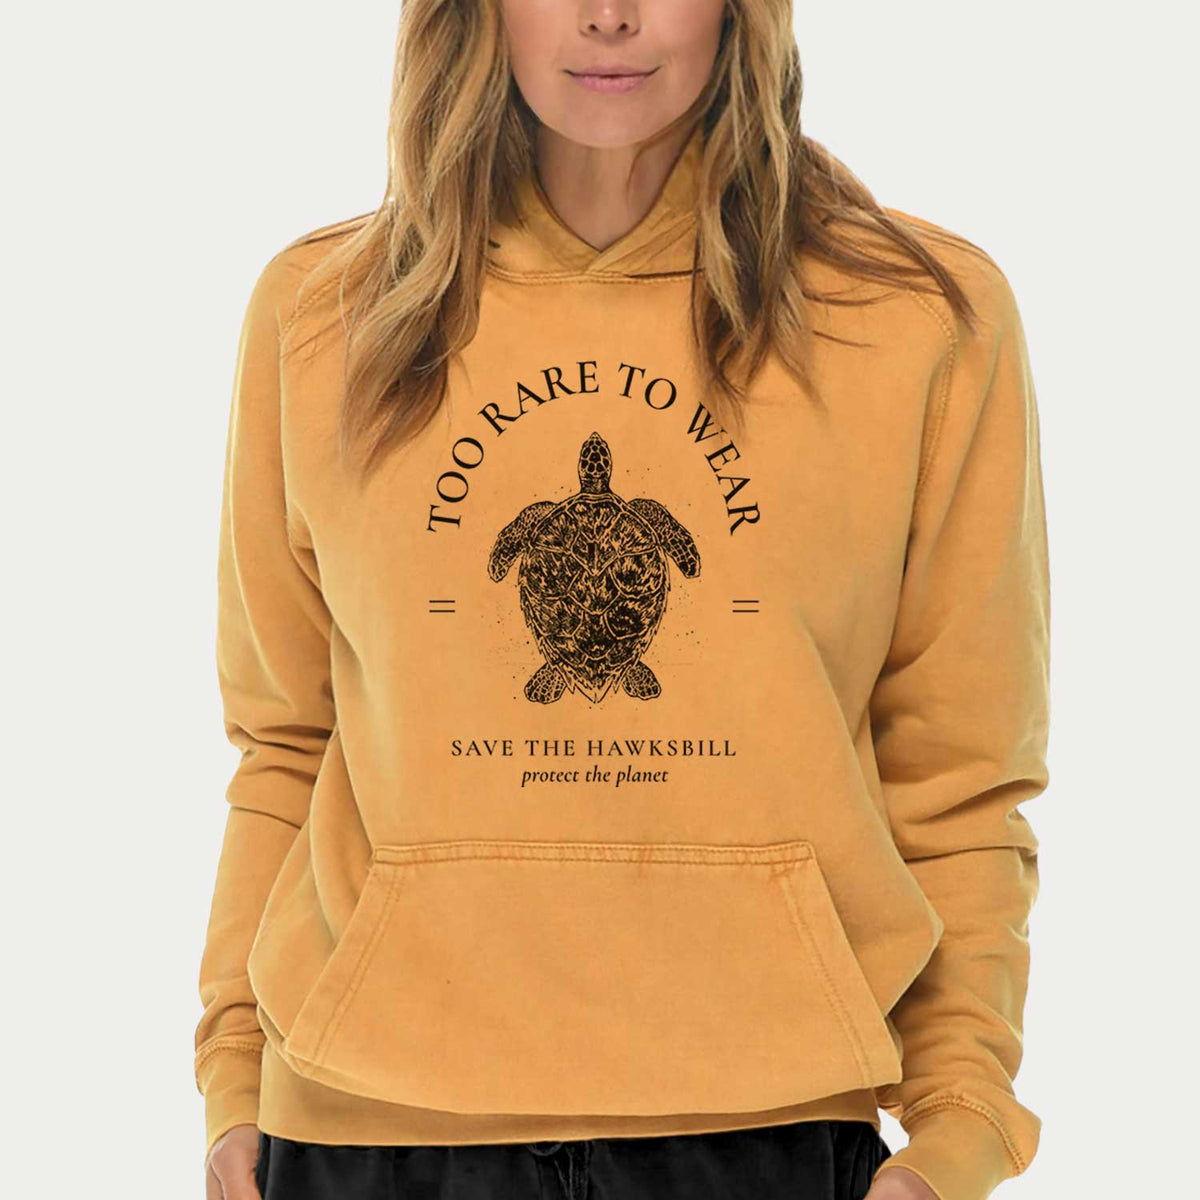 Too Rare to Wear - Save the Hawksbill  - Mid-Weight Unisex Vintage 100% Cotton Hoodie